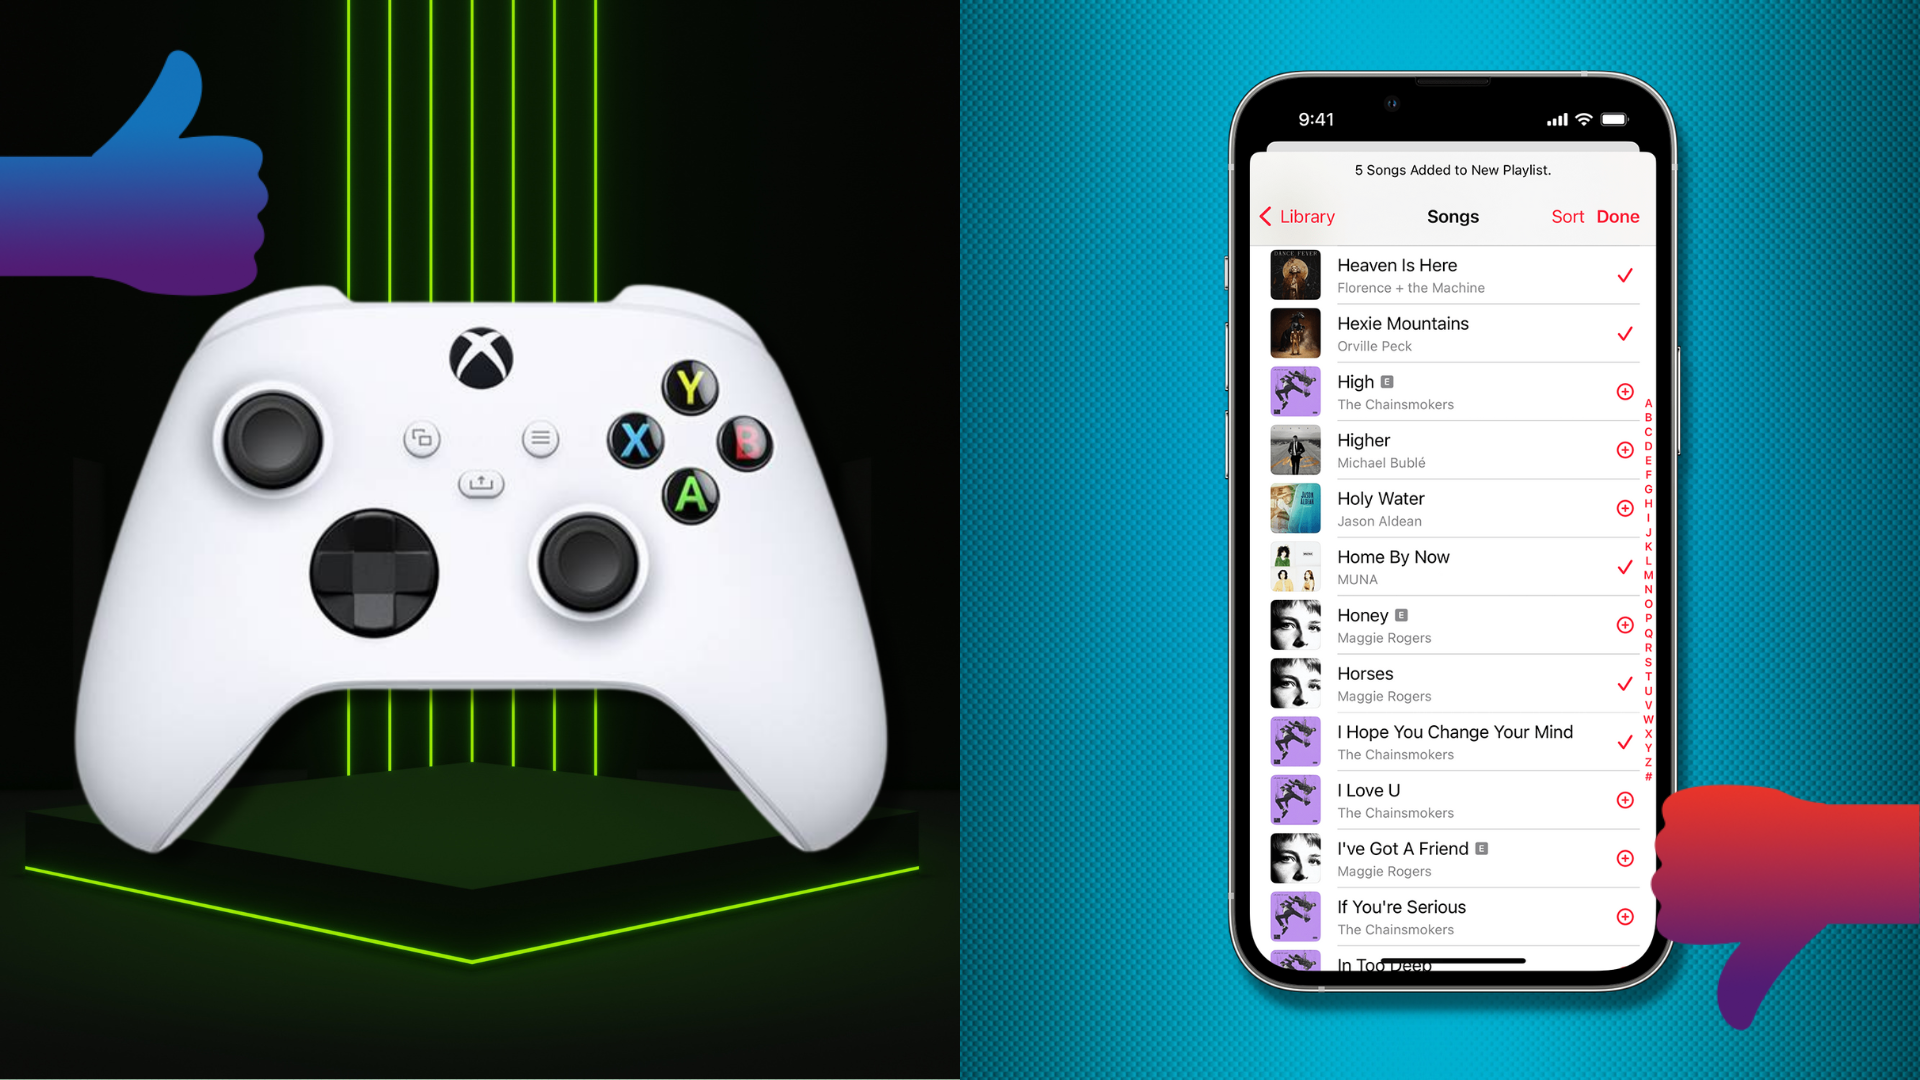 Winners and losers: Xbox will get an energy-saving replace as Apple Music bug switches playlists | Digital Noch